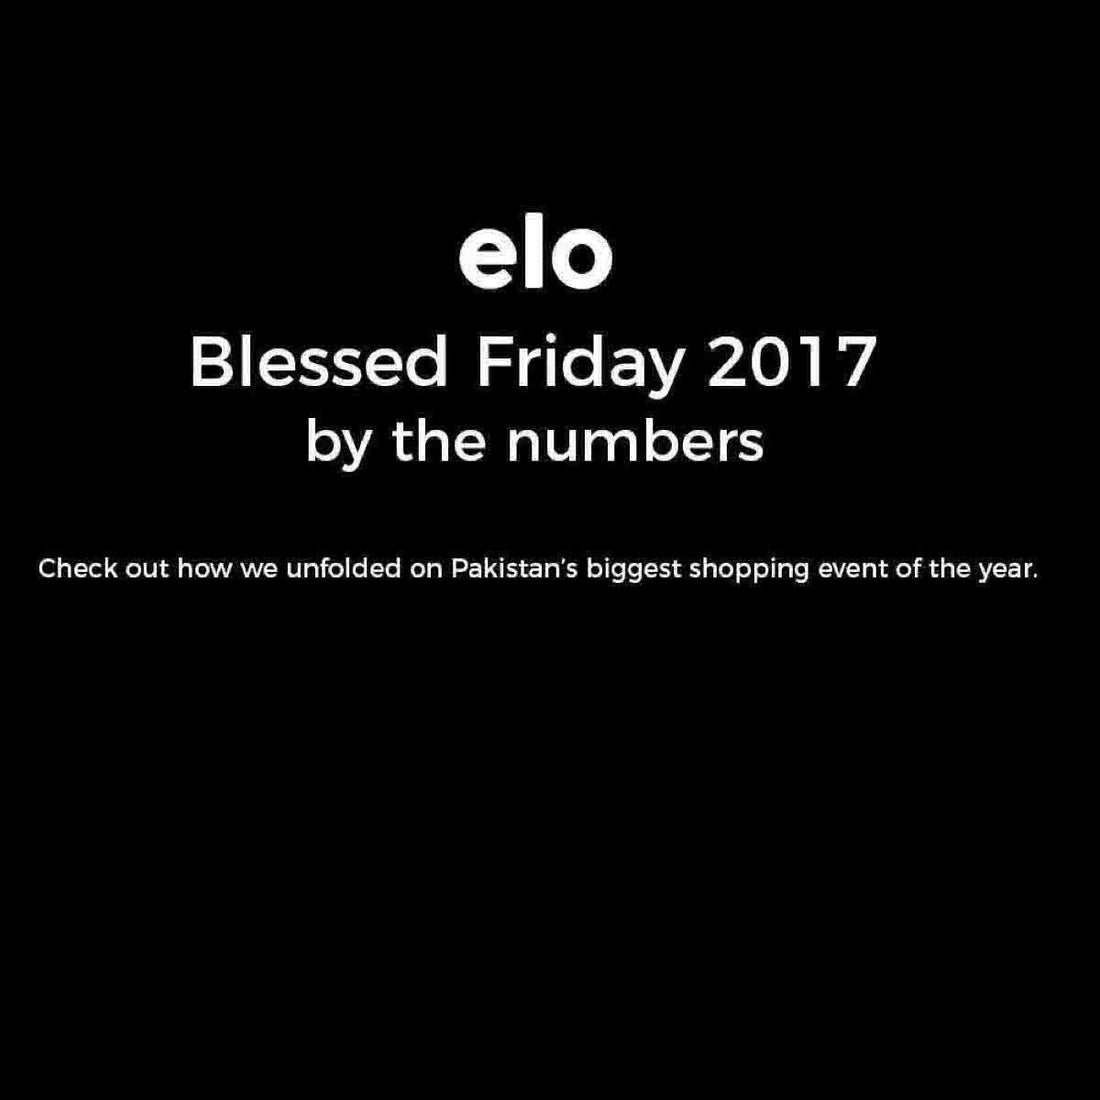 elo Blessed Friday by the numbers.